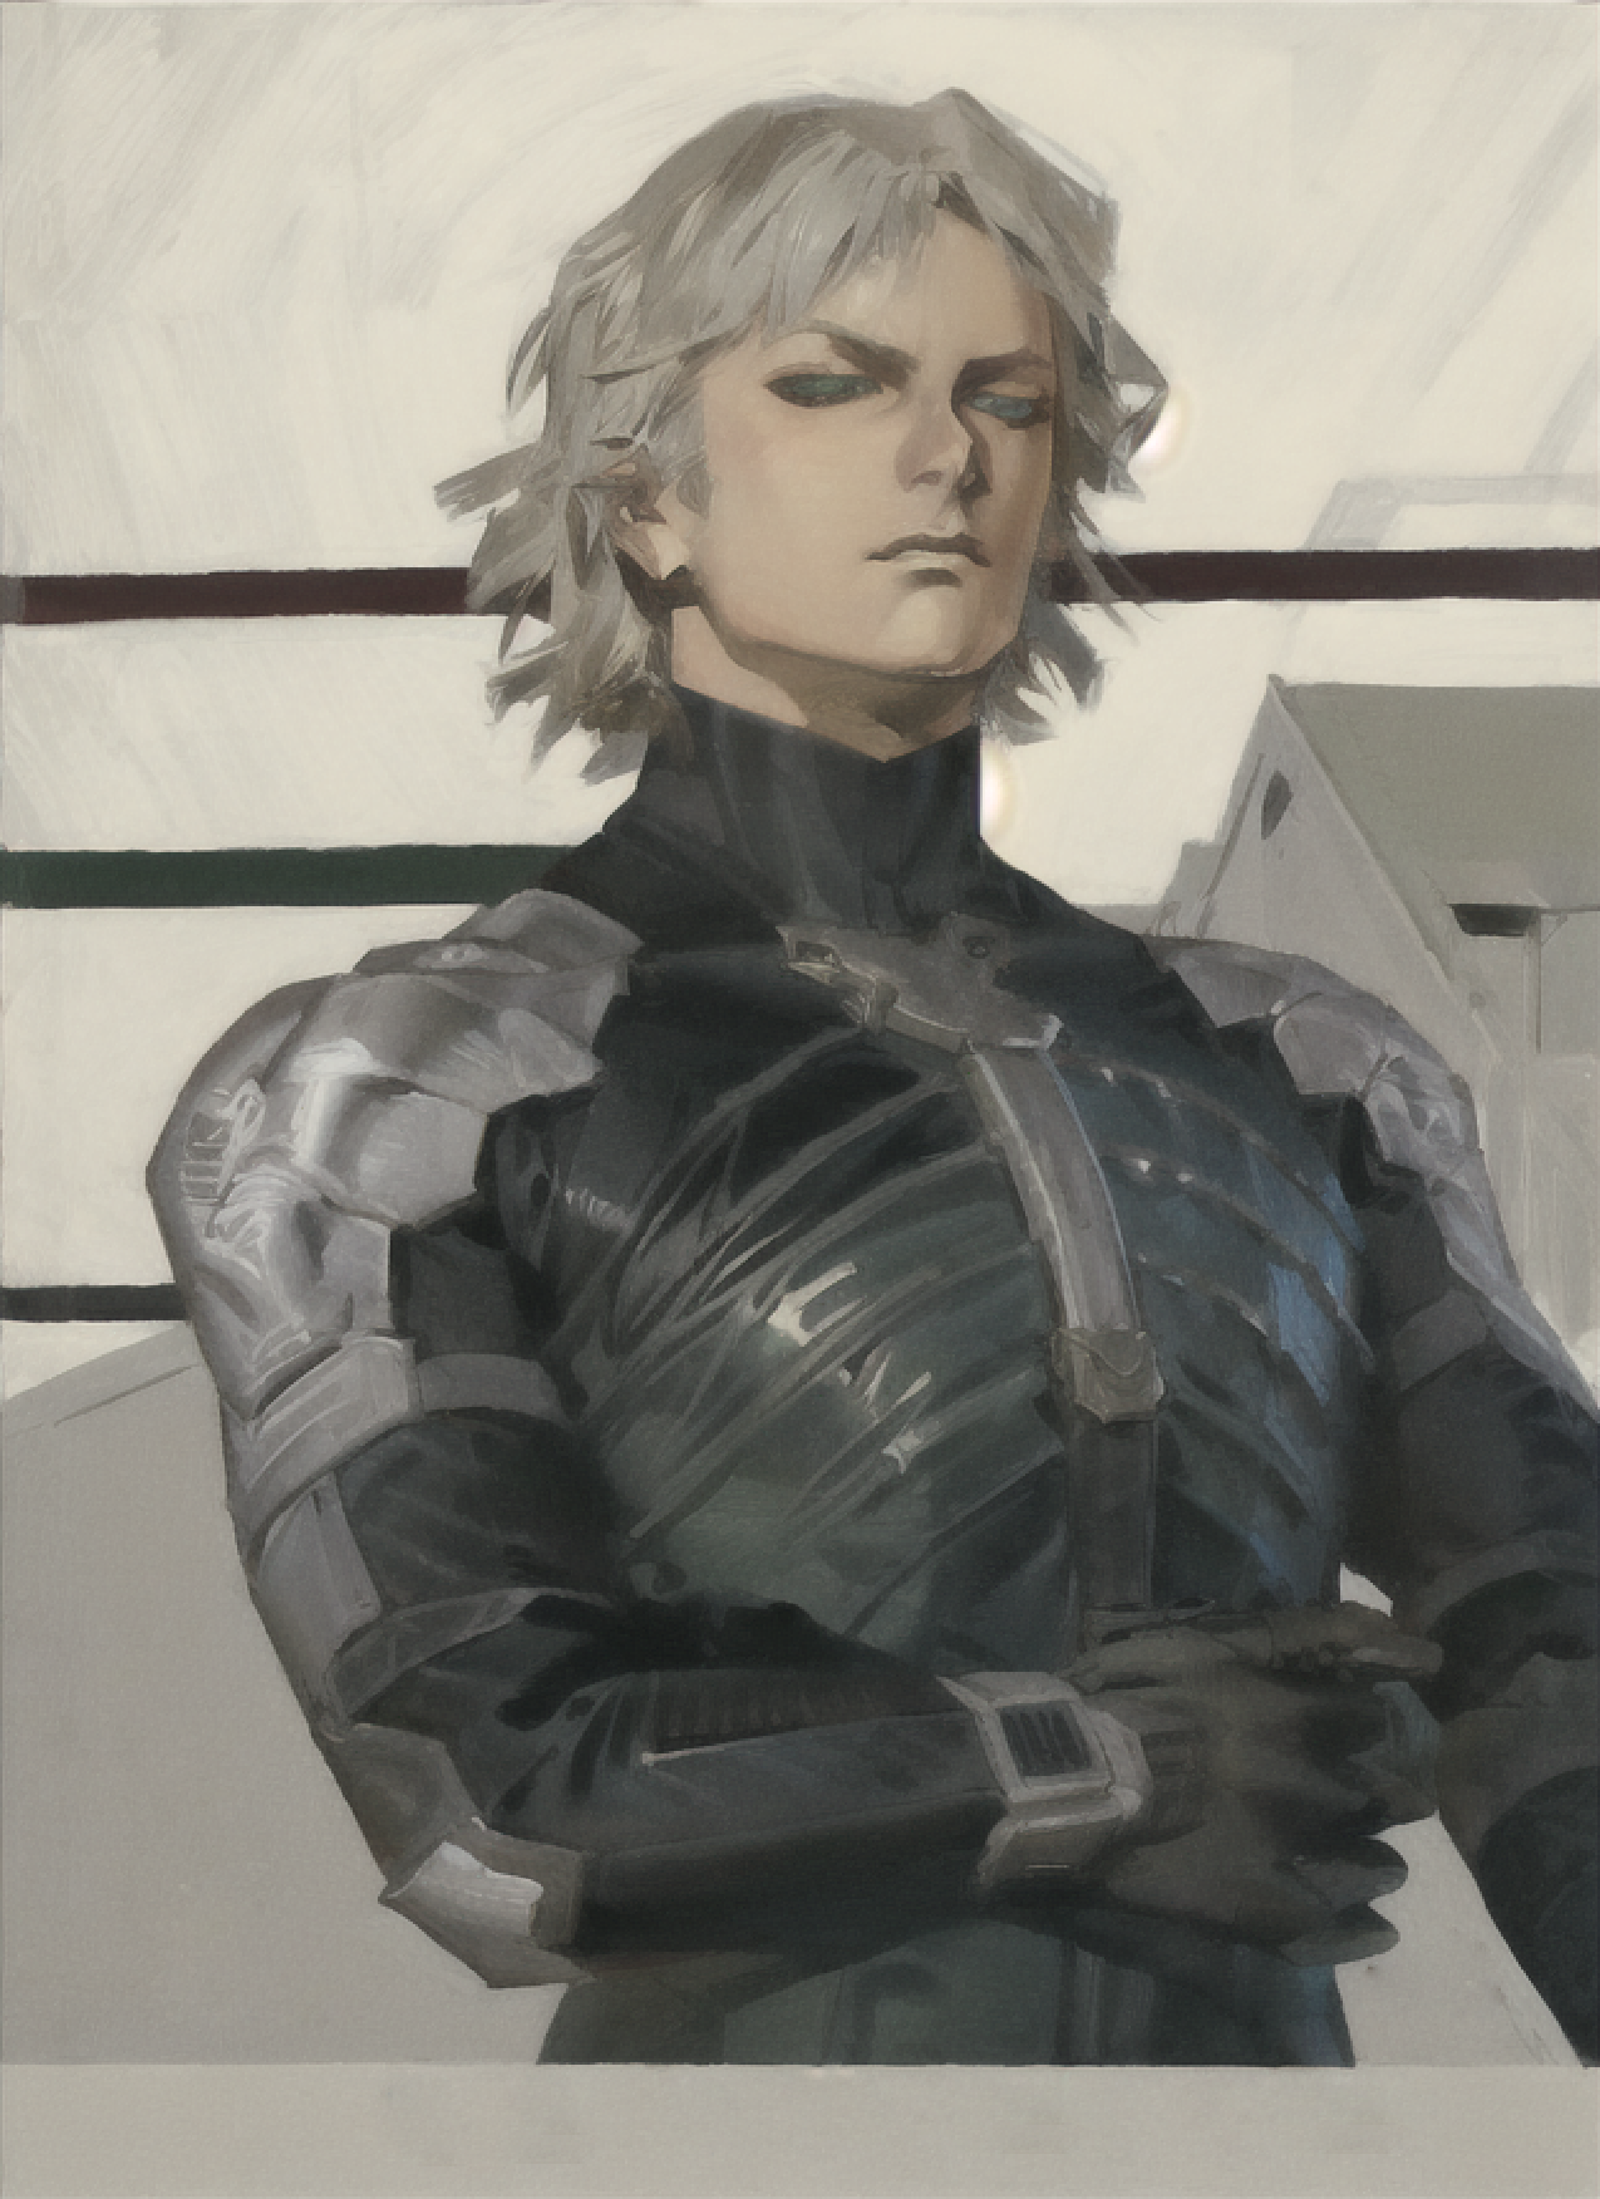 Raiden | Metal Gear Solid 2 image by clearnights